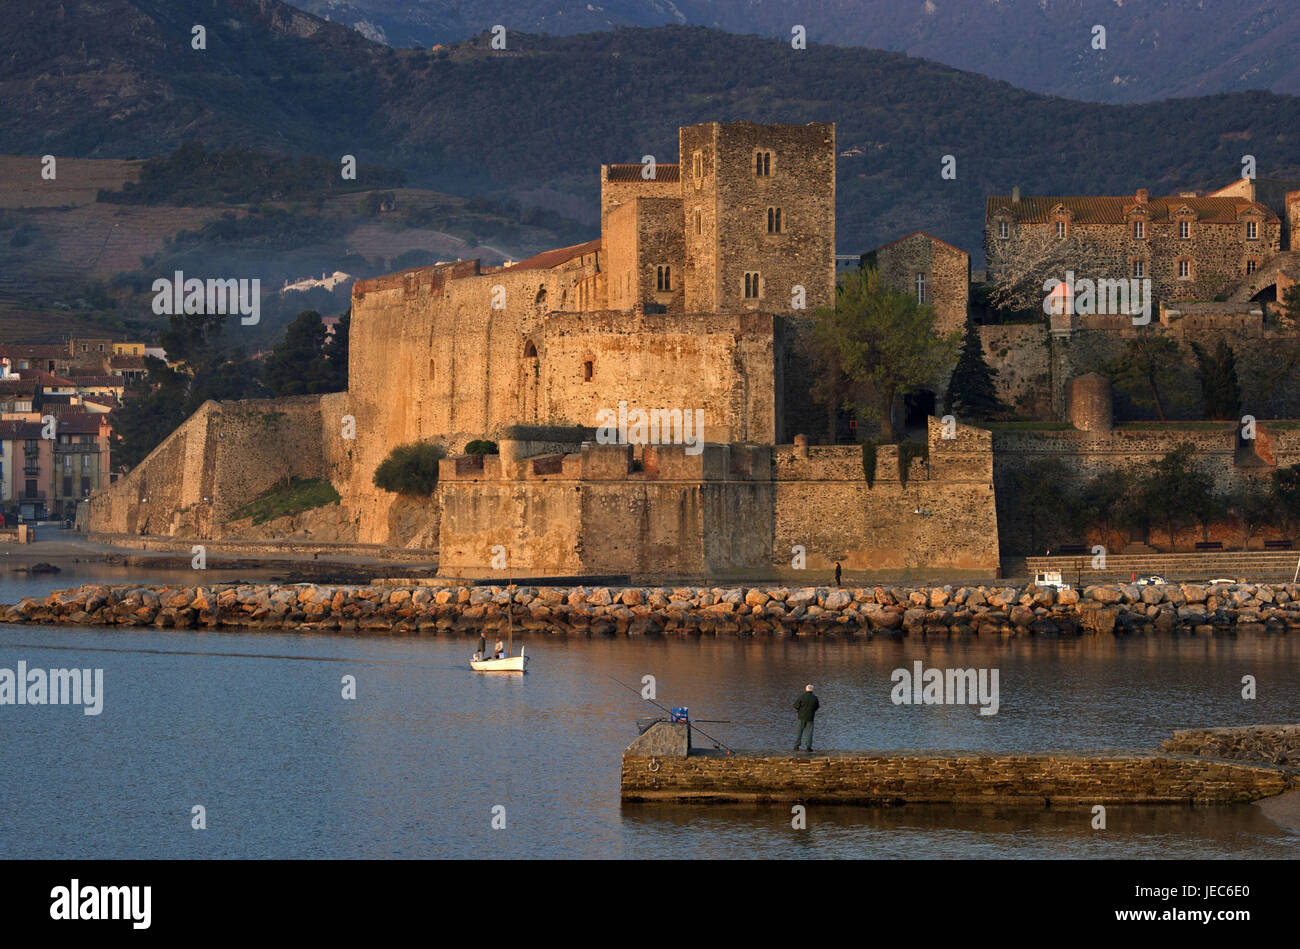 Europe, France, Collioure, view at the château royal, Europe, France, Languedoc-Roussillon, Collioure, Département of Pyrénées-East ale, tag, colour picture, person in the background, angler, catch, architecture, building, structure, structures, lock, locks, traditional culture, waters, water, sea, the Mediterranean Sea, scenery, sceneries, coast, coastal scenery, coastal sceneries, coasts, ocean, oceans, geography, travel, destination, holiday destination, tourism, tourism, parish, parishes, place, places, town, towns, town view, town views, shore, king's castle, castle, castles, fortress, Stock Photo